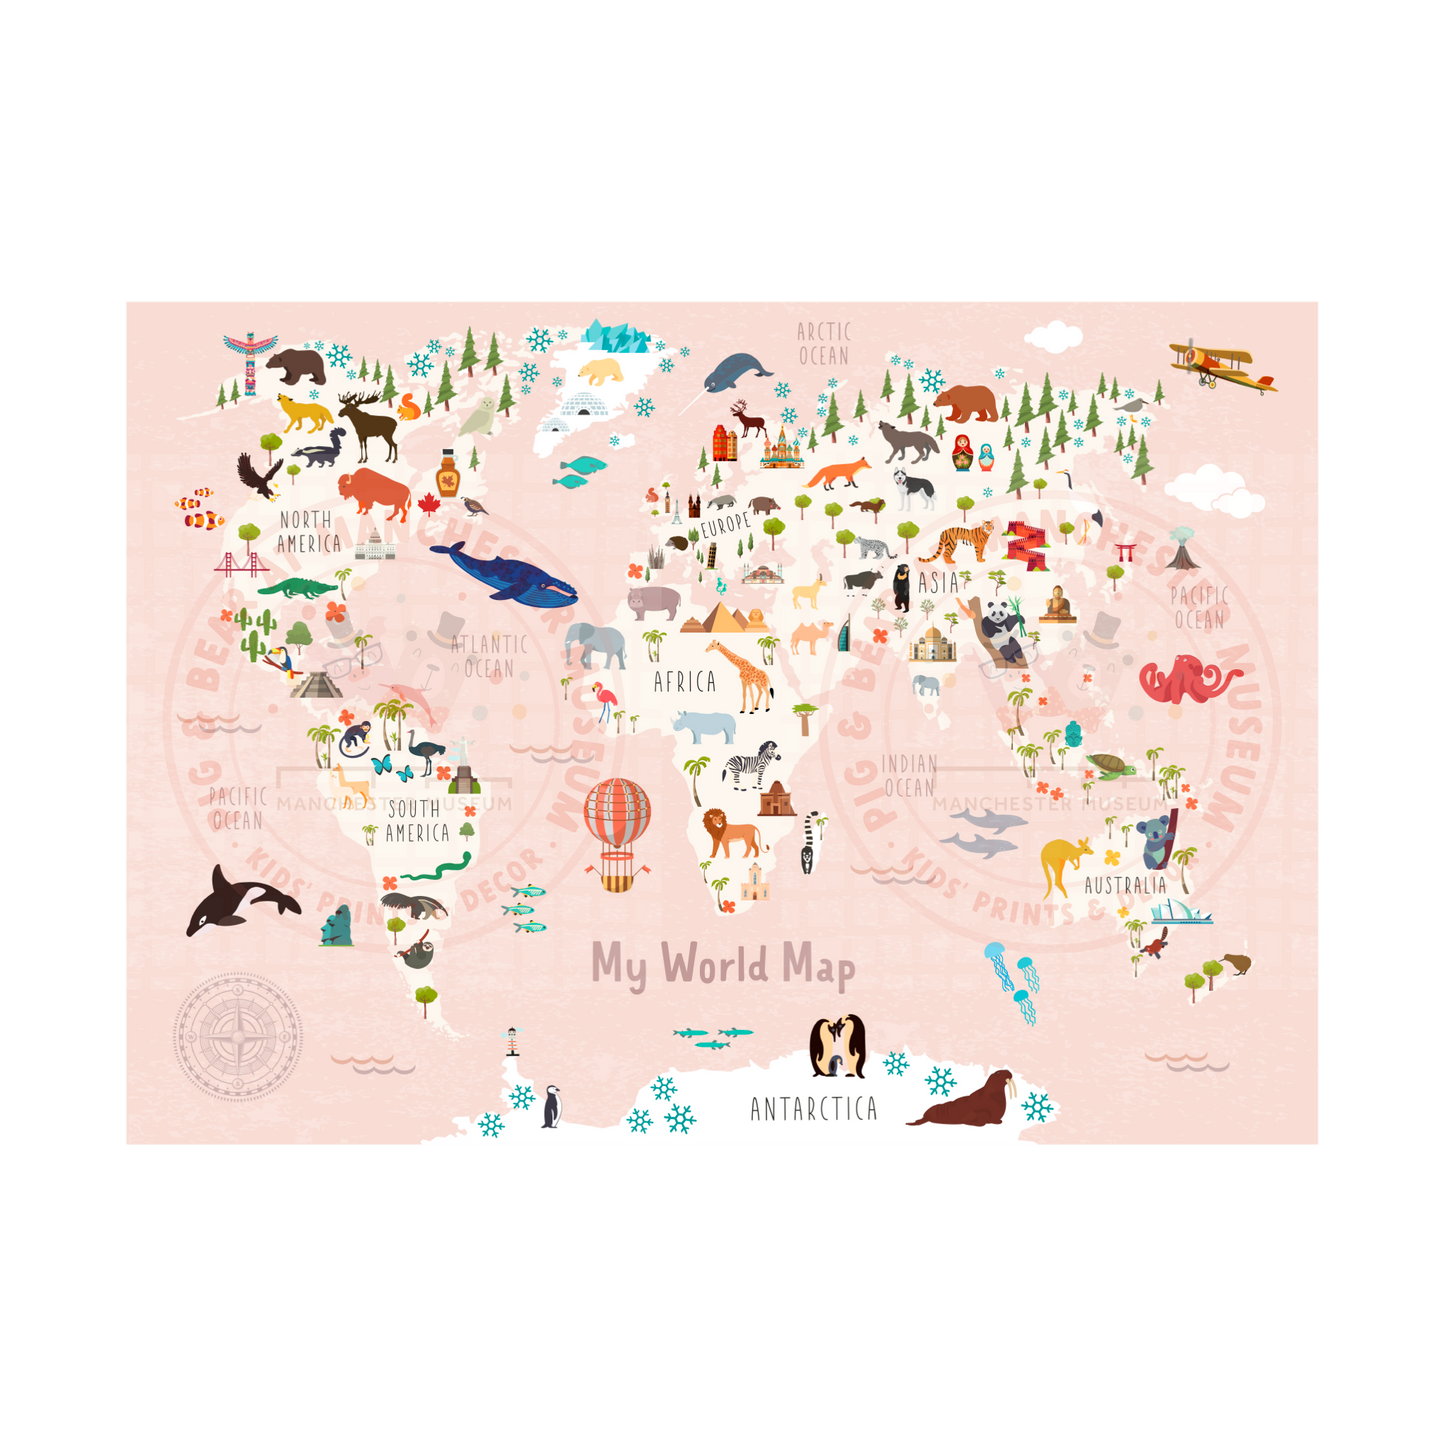 World map with pink background and animals from the regions on it.